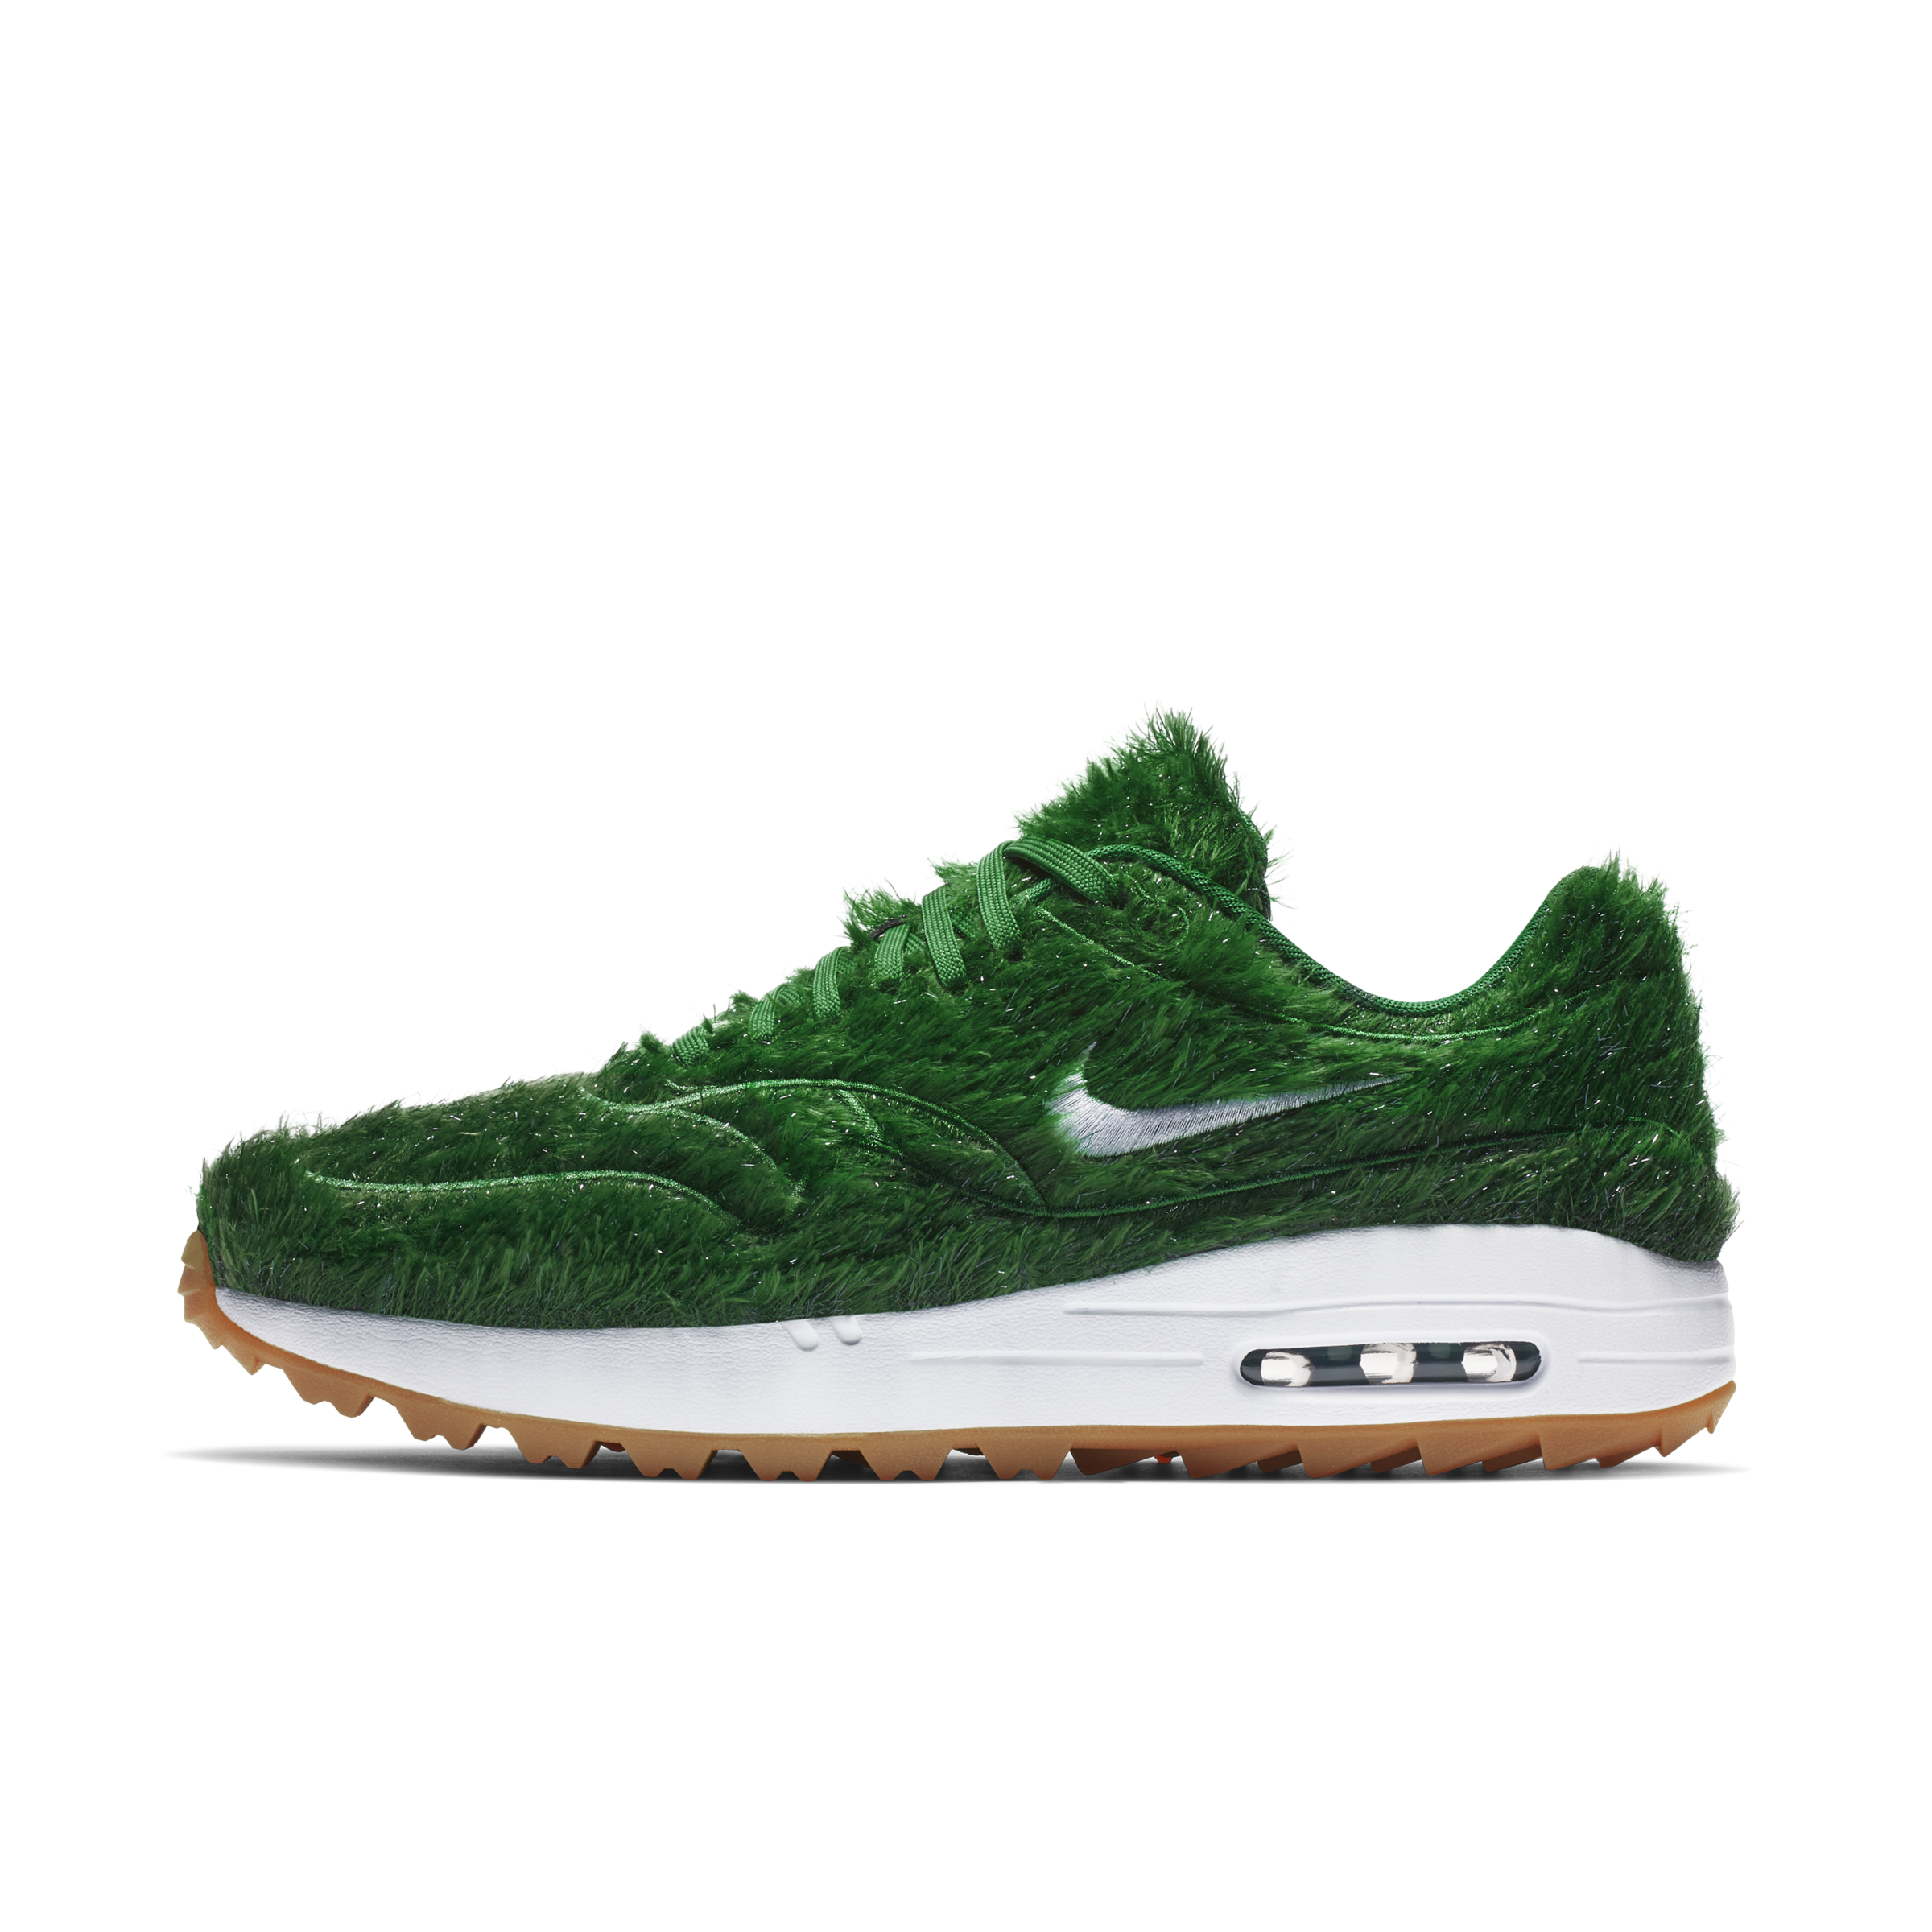 Nike Air Max 1 Golf shoes, including 